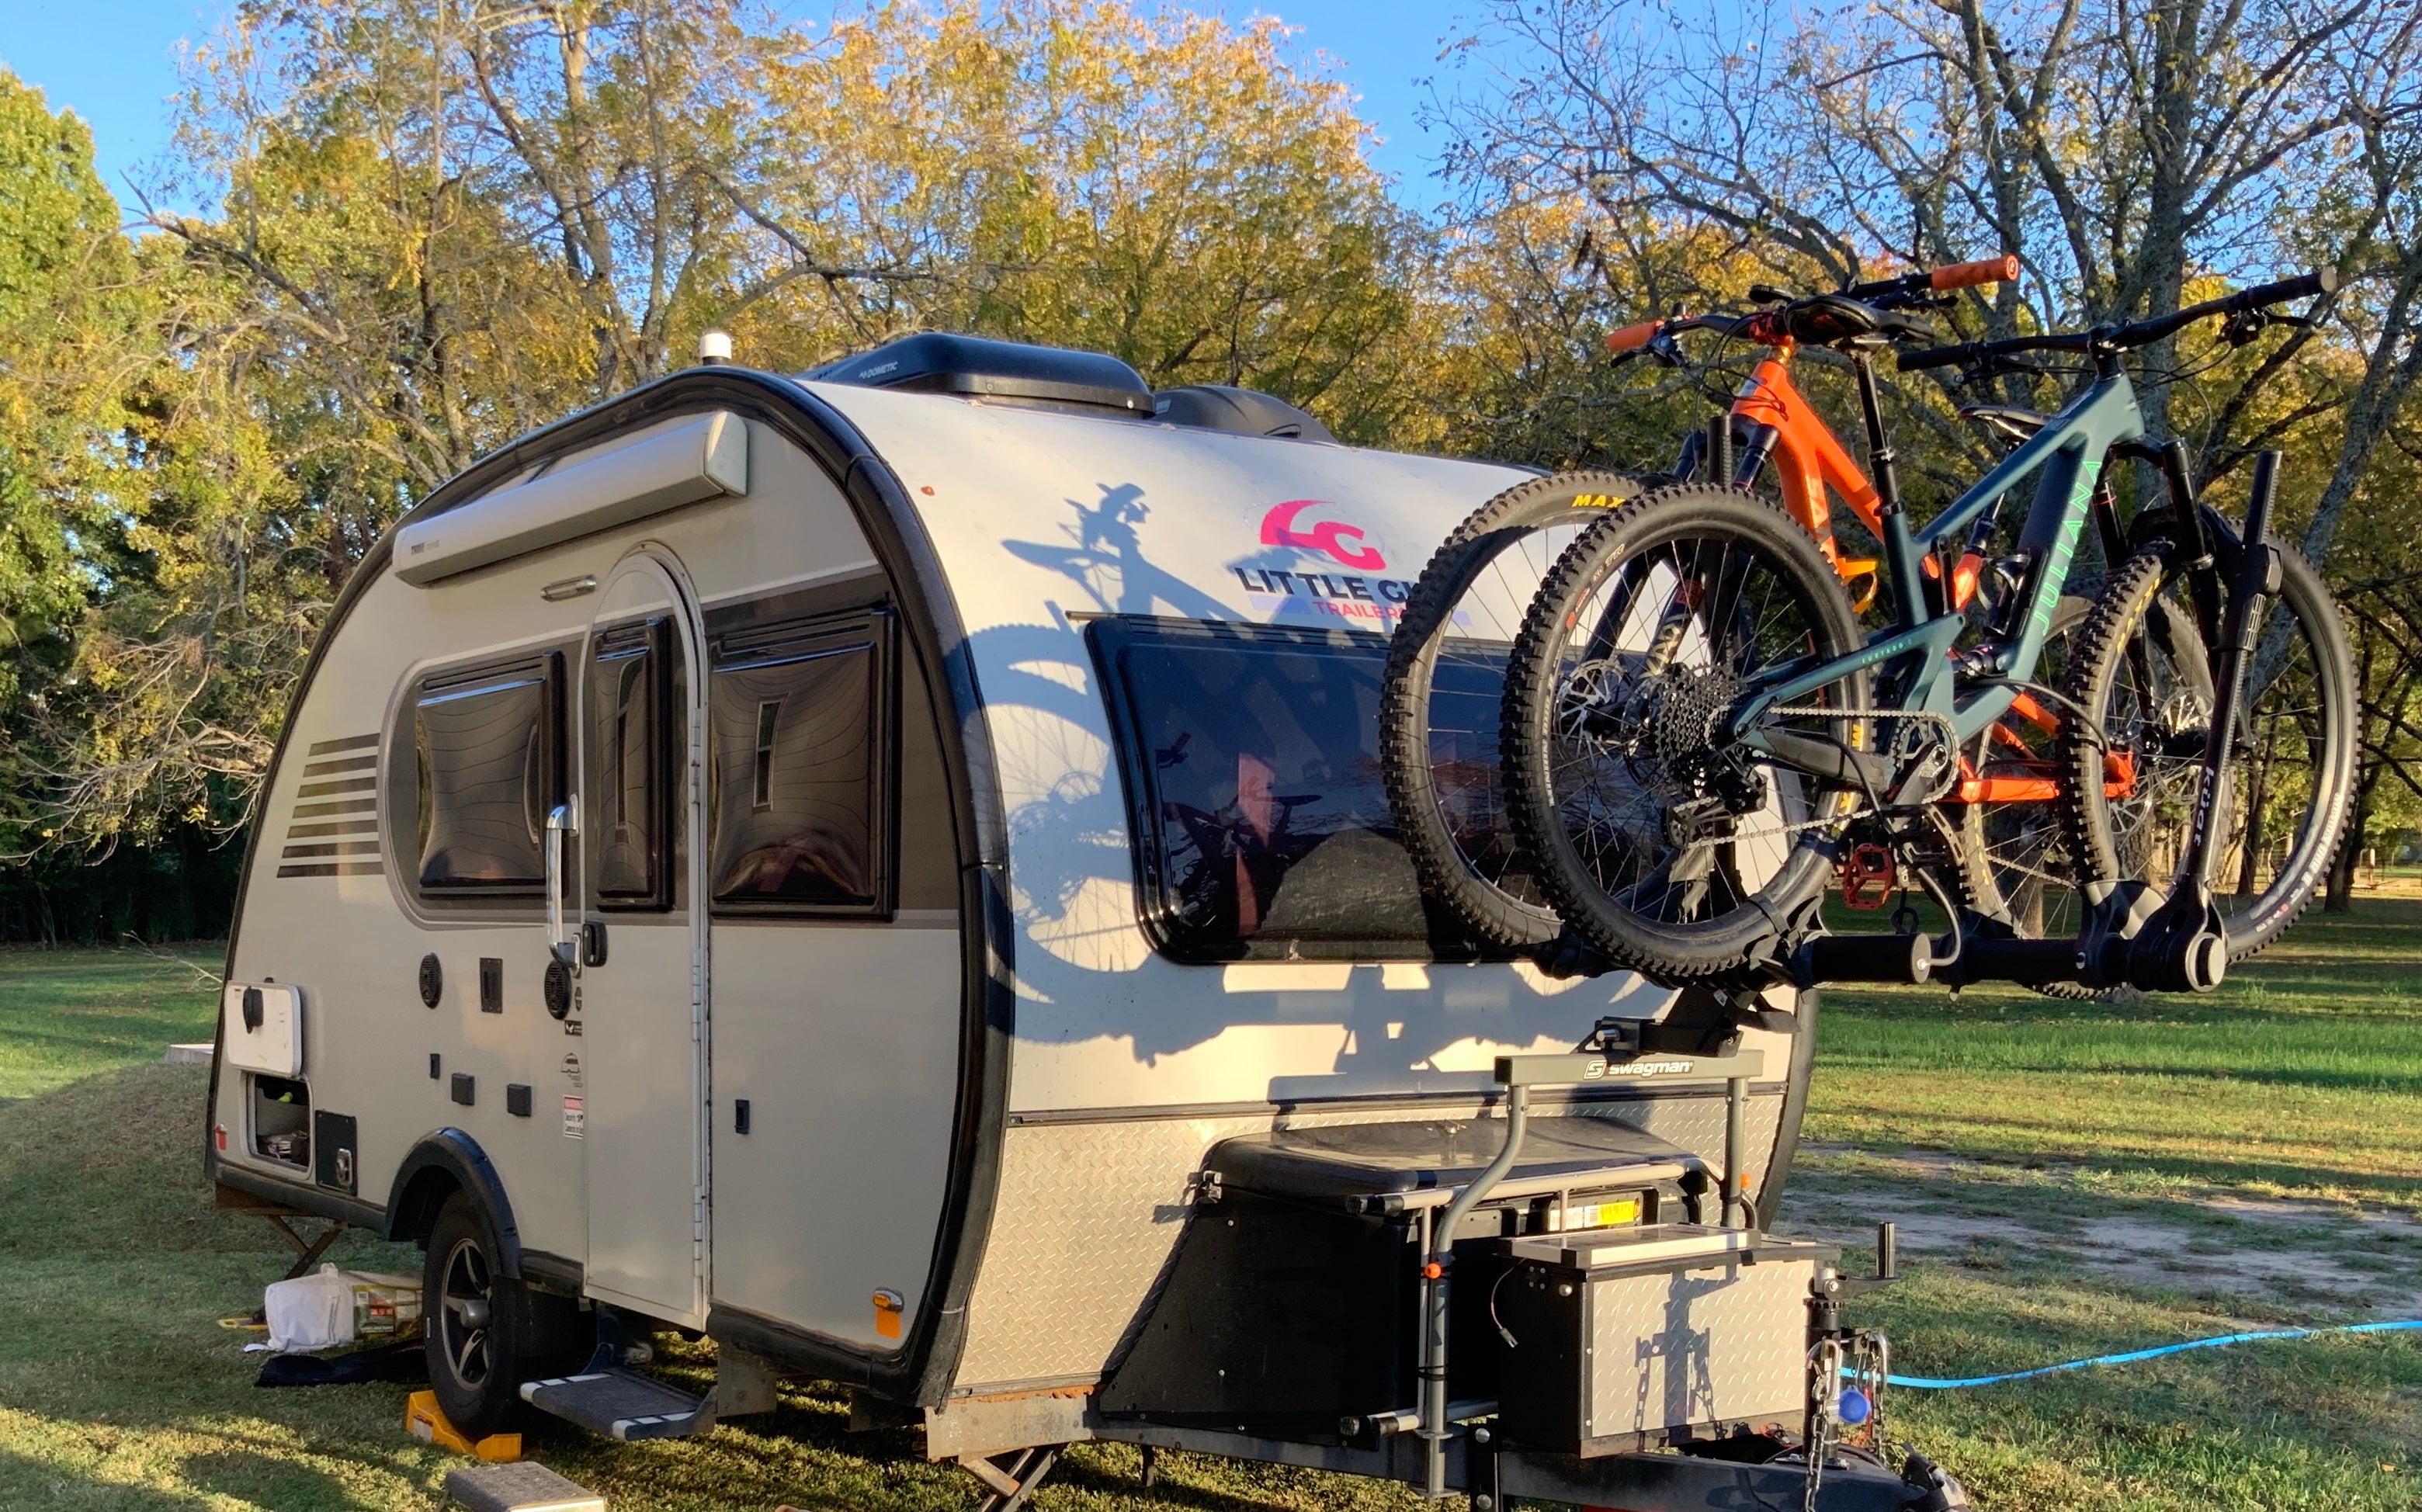 Camper submitted image from 1 OFF 13 Trails - 1